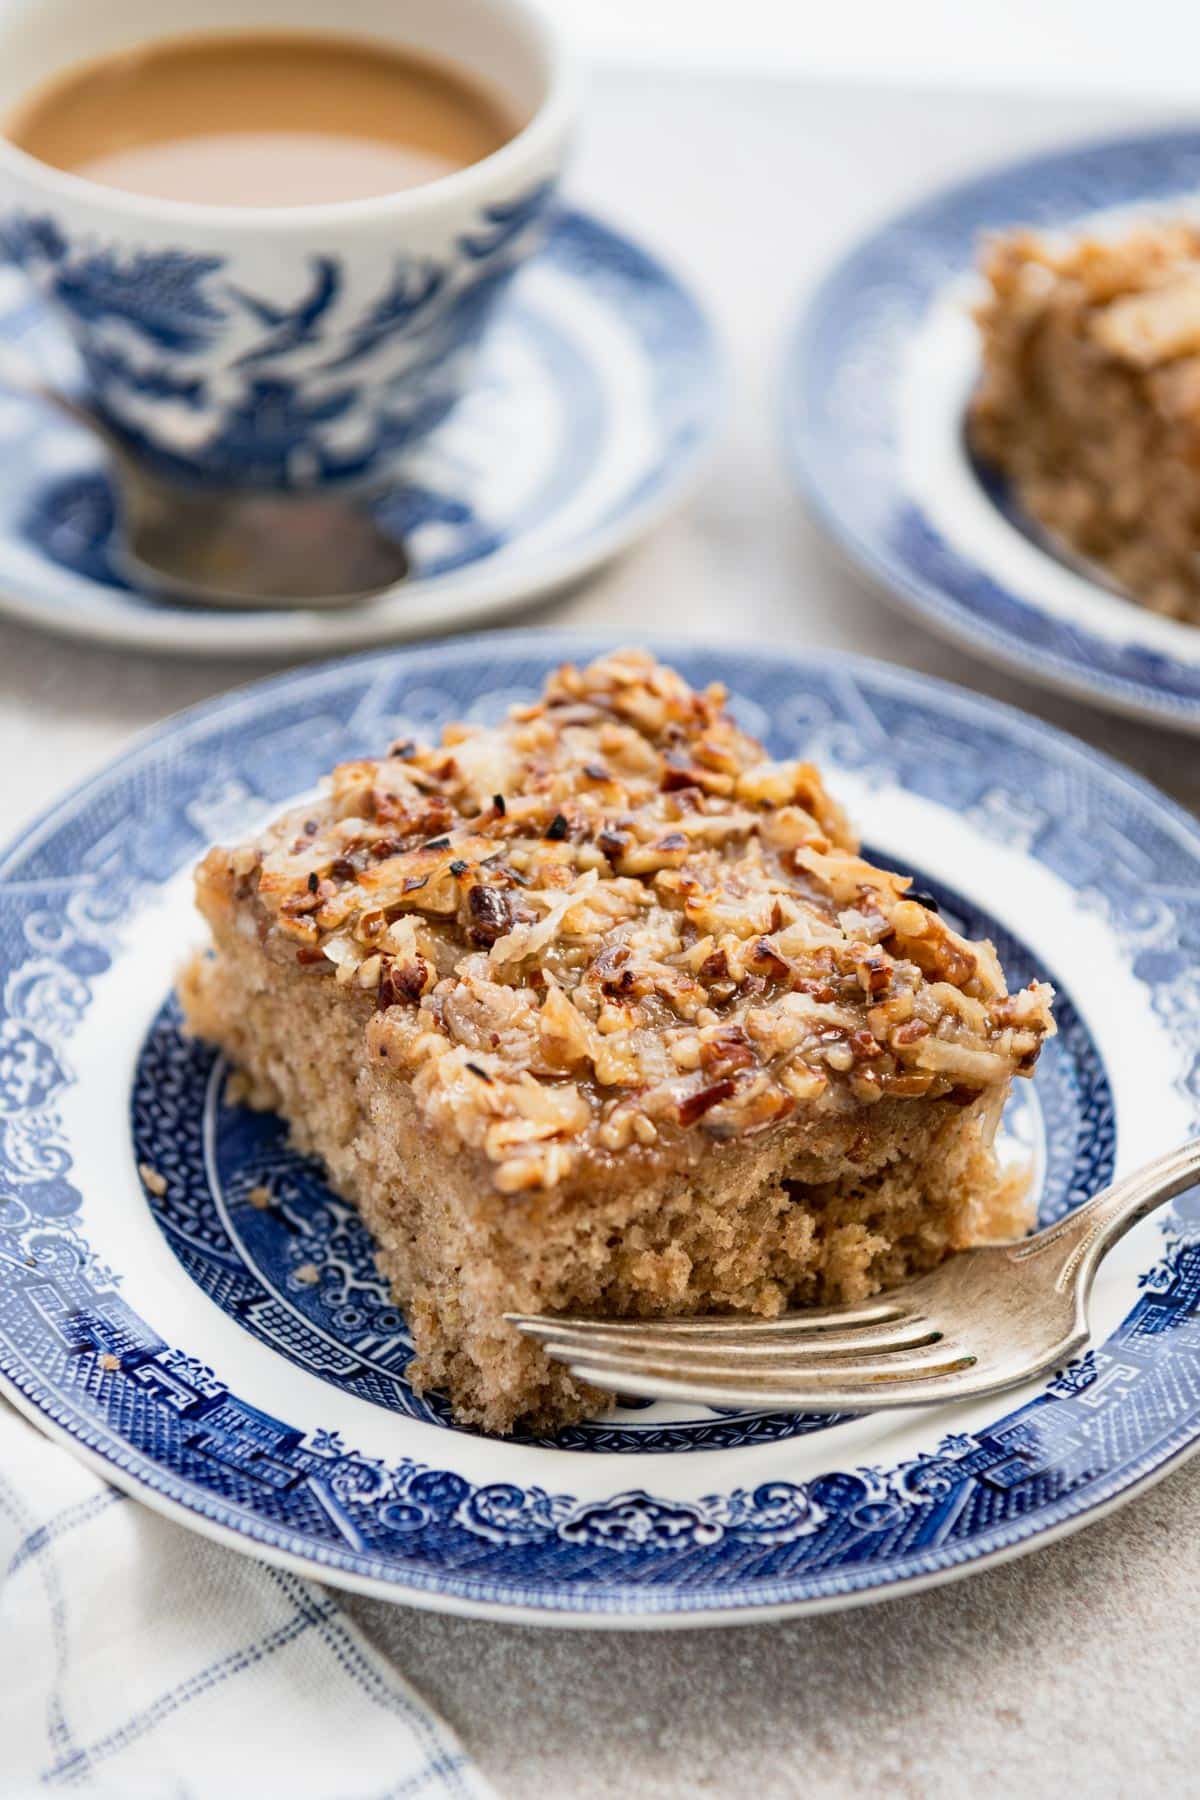 Piece of old fashioned oatmeal cake recipe served on a blue and white plate.